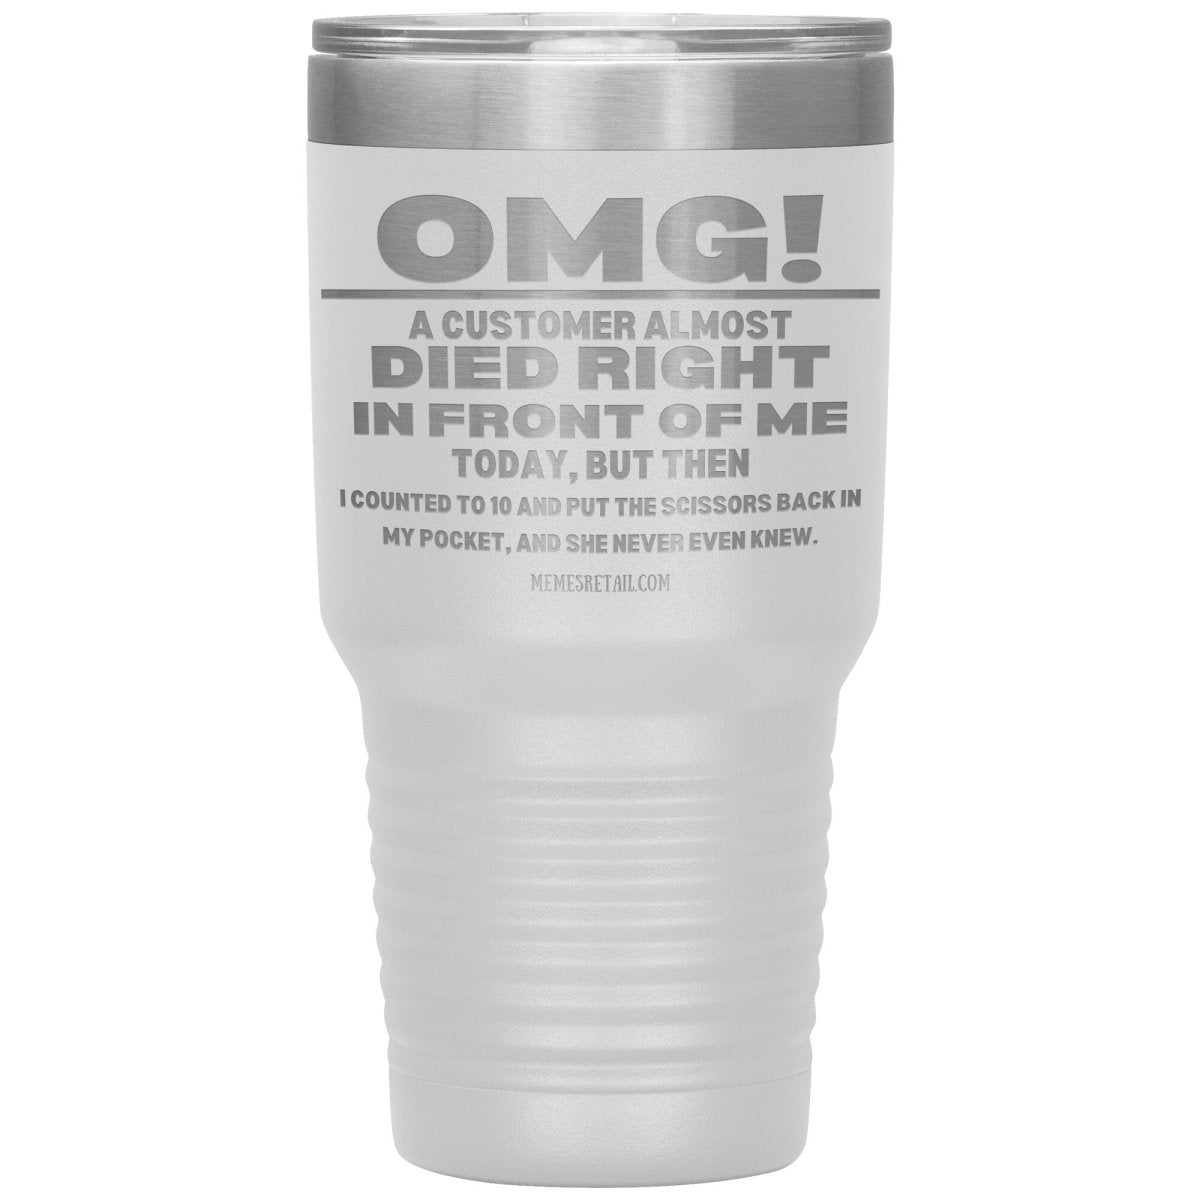 OMG! A Customer Almost Died Right In Front Of Me Tumbler, 30oz Insulated Tumbler / White - MemesRetail.com